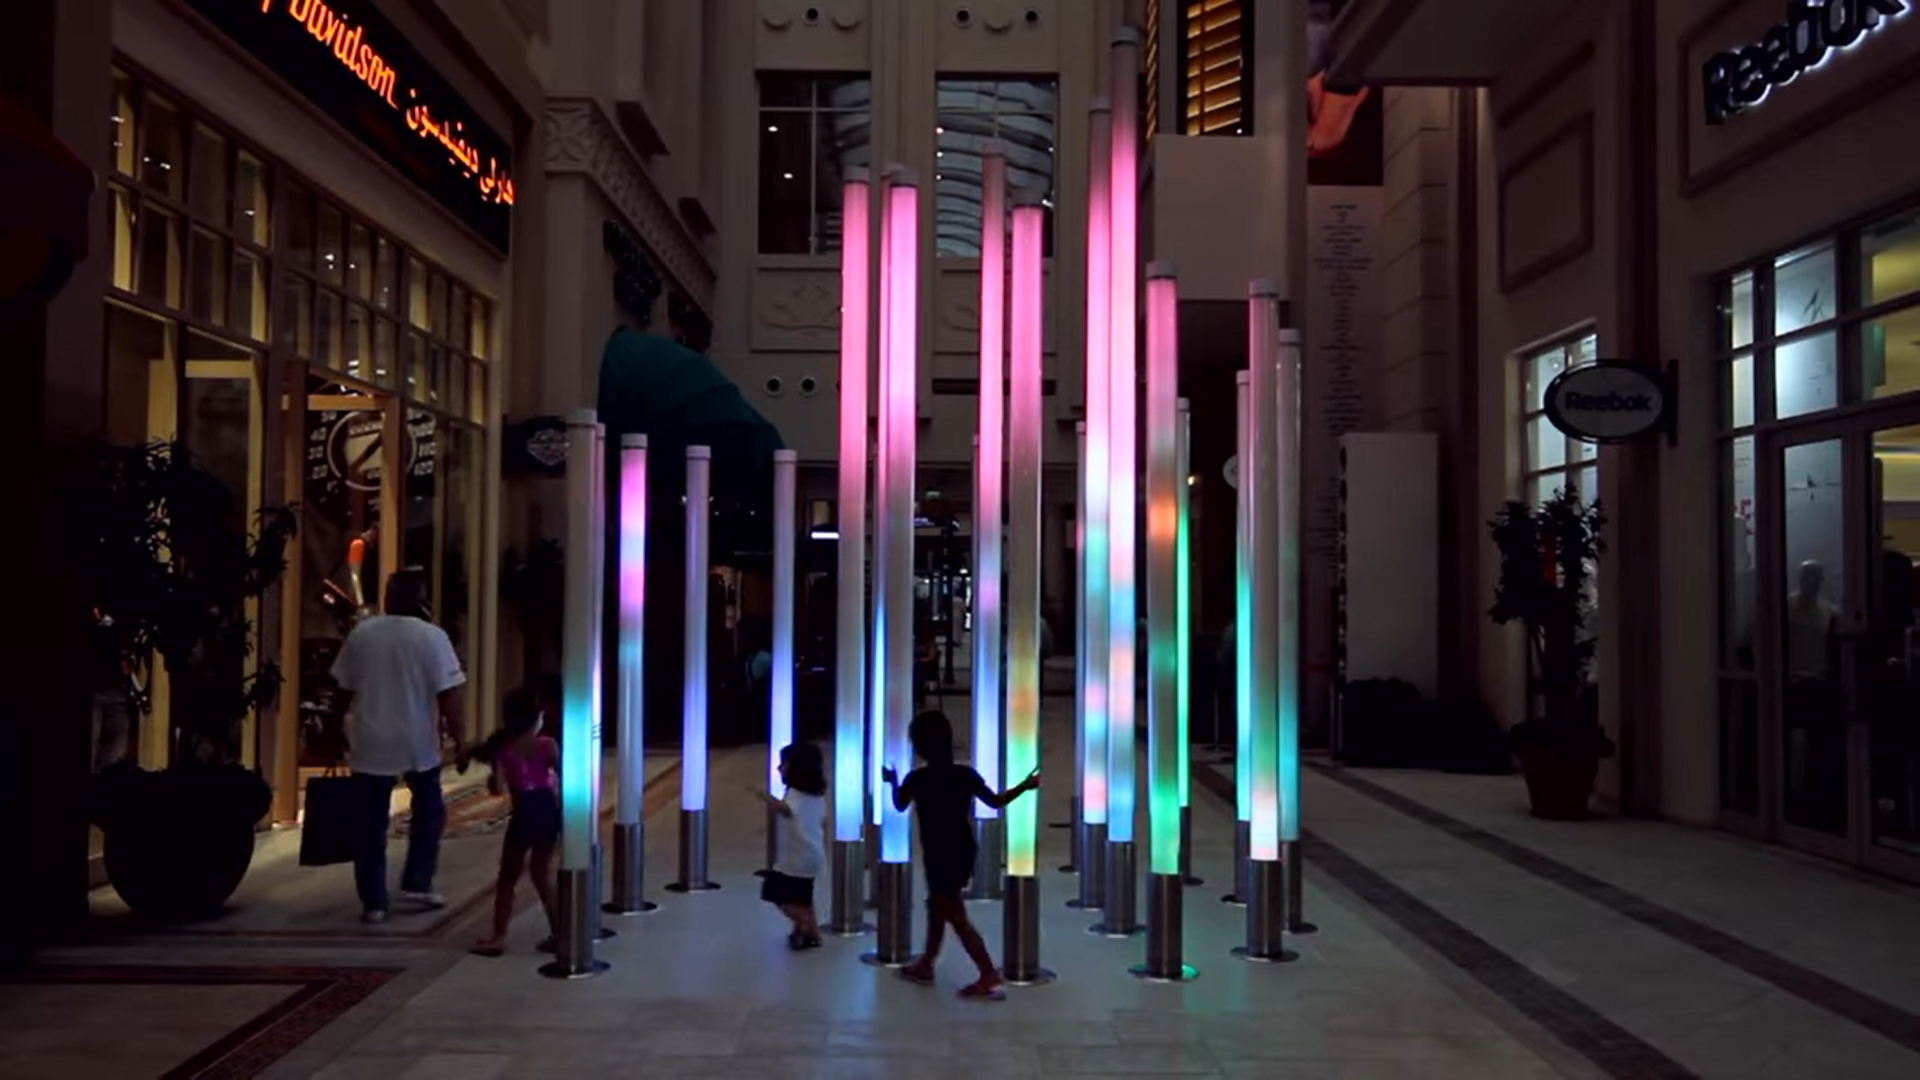 The Aviary sound and light installation in the Dubai Mall	